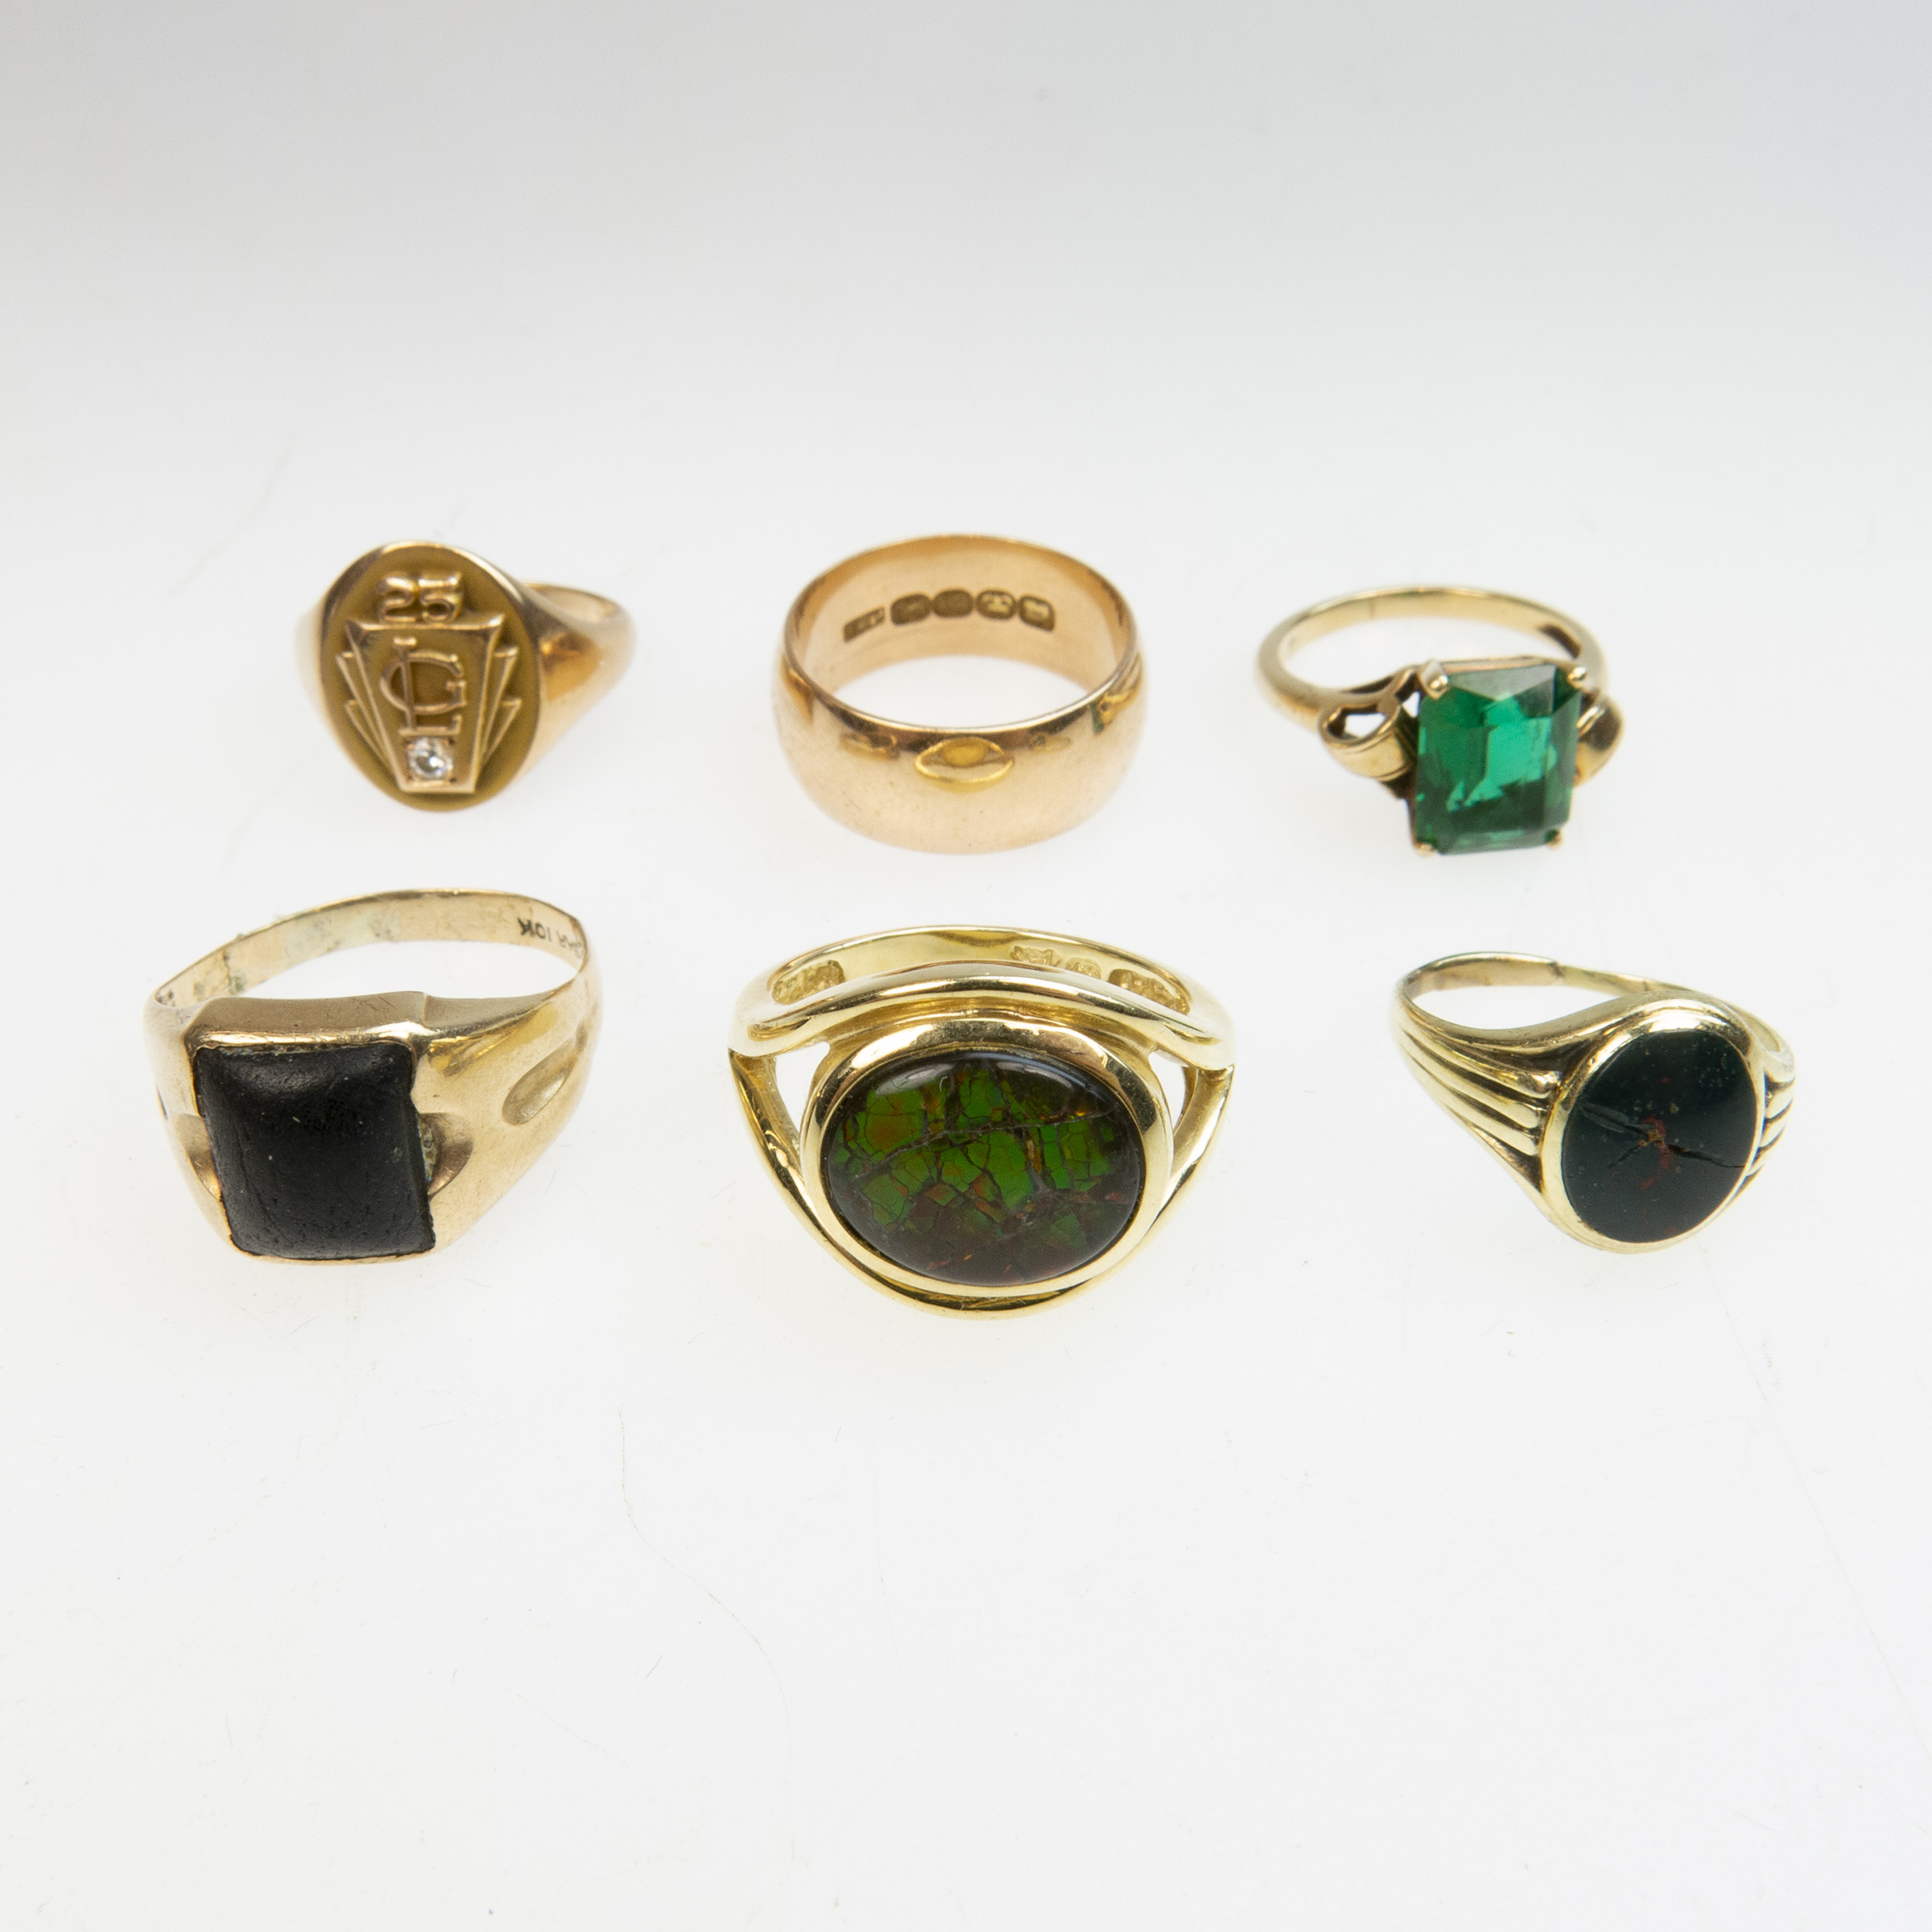 1 x 18k, 1 x 14k, 1 x 12k and 3 x 10k Yellow Gold Rings